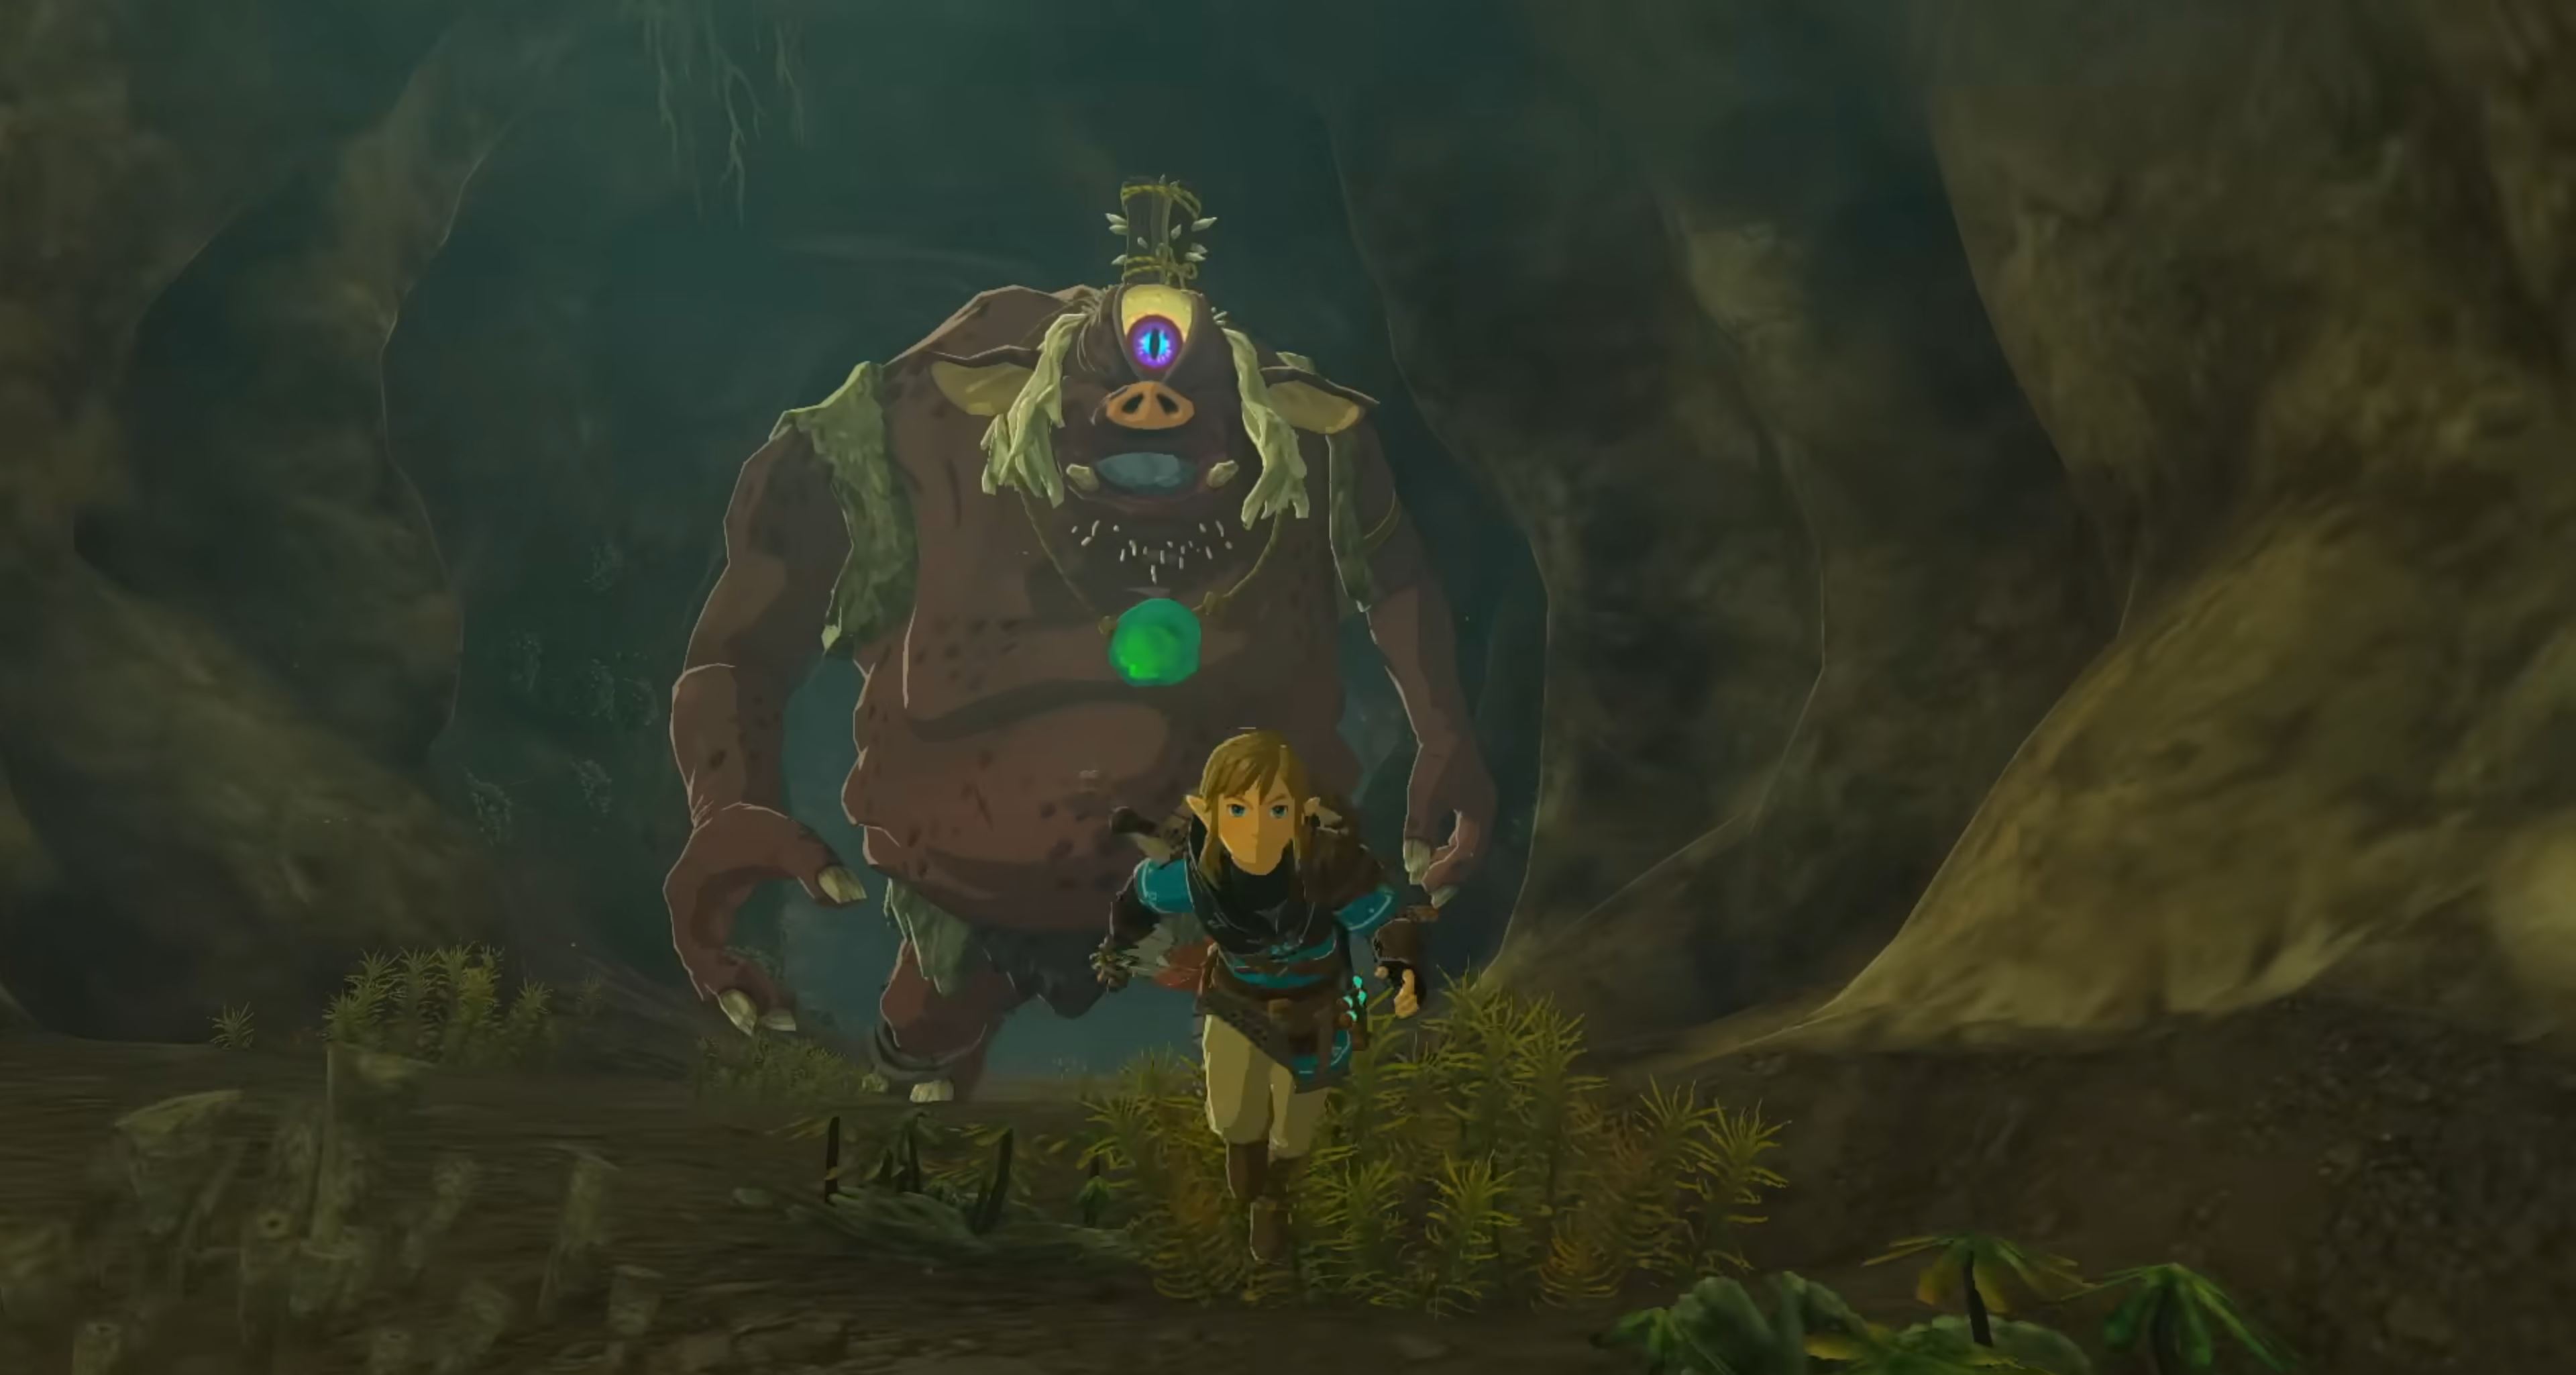 Video) The Legend of Zelda Breath of the Wild running on PS4 